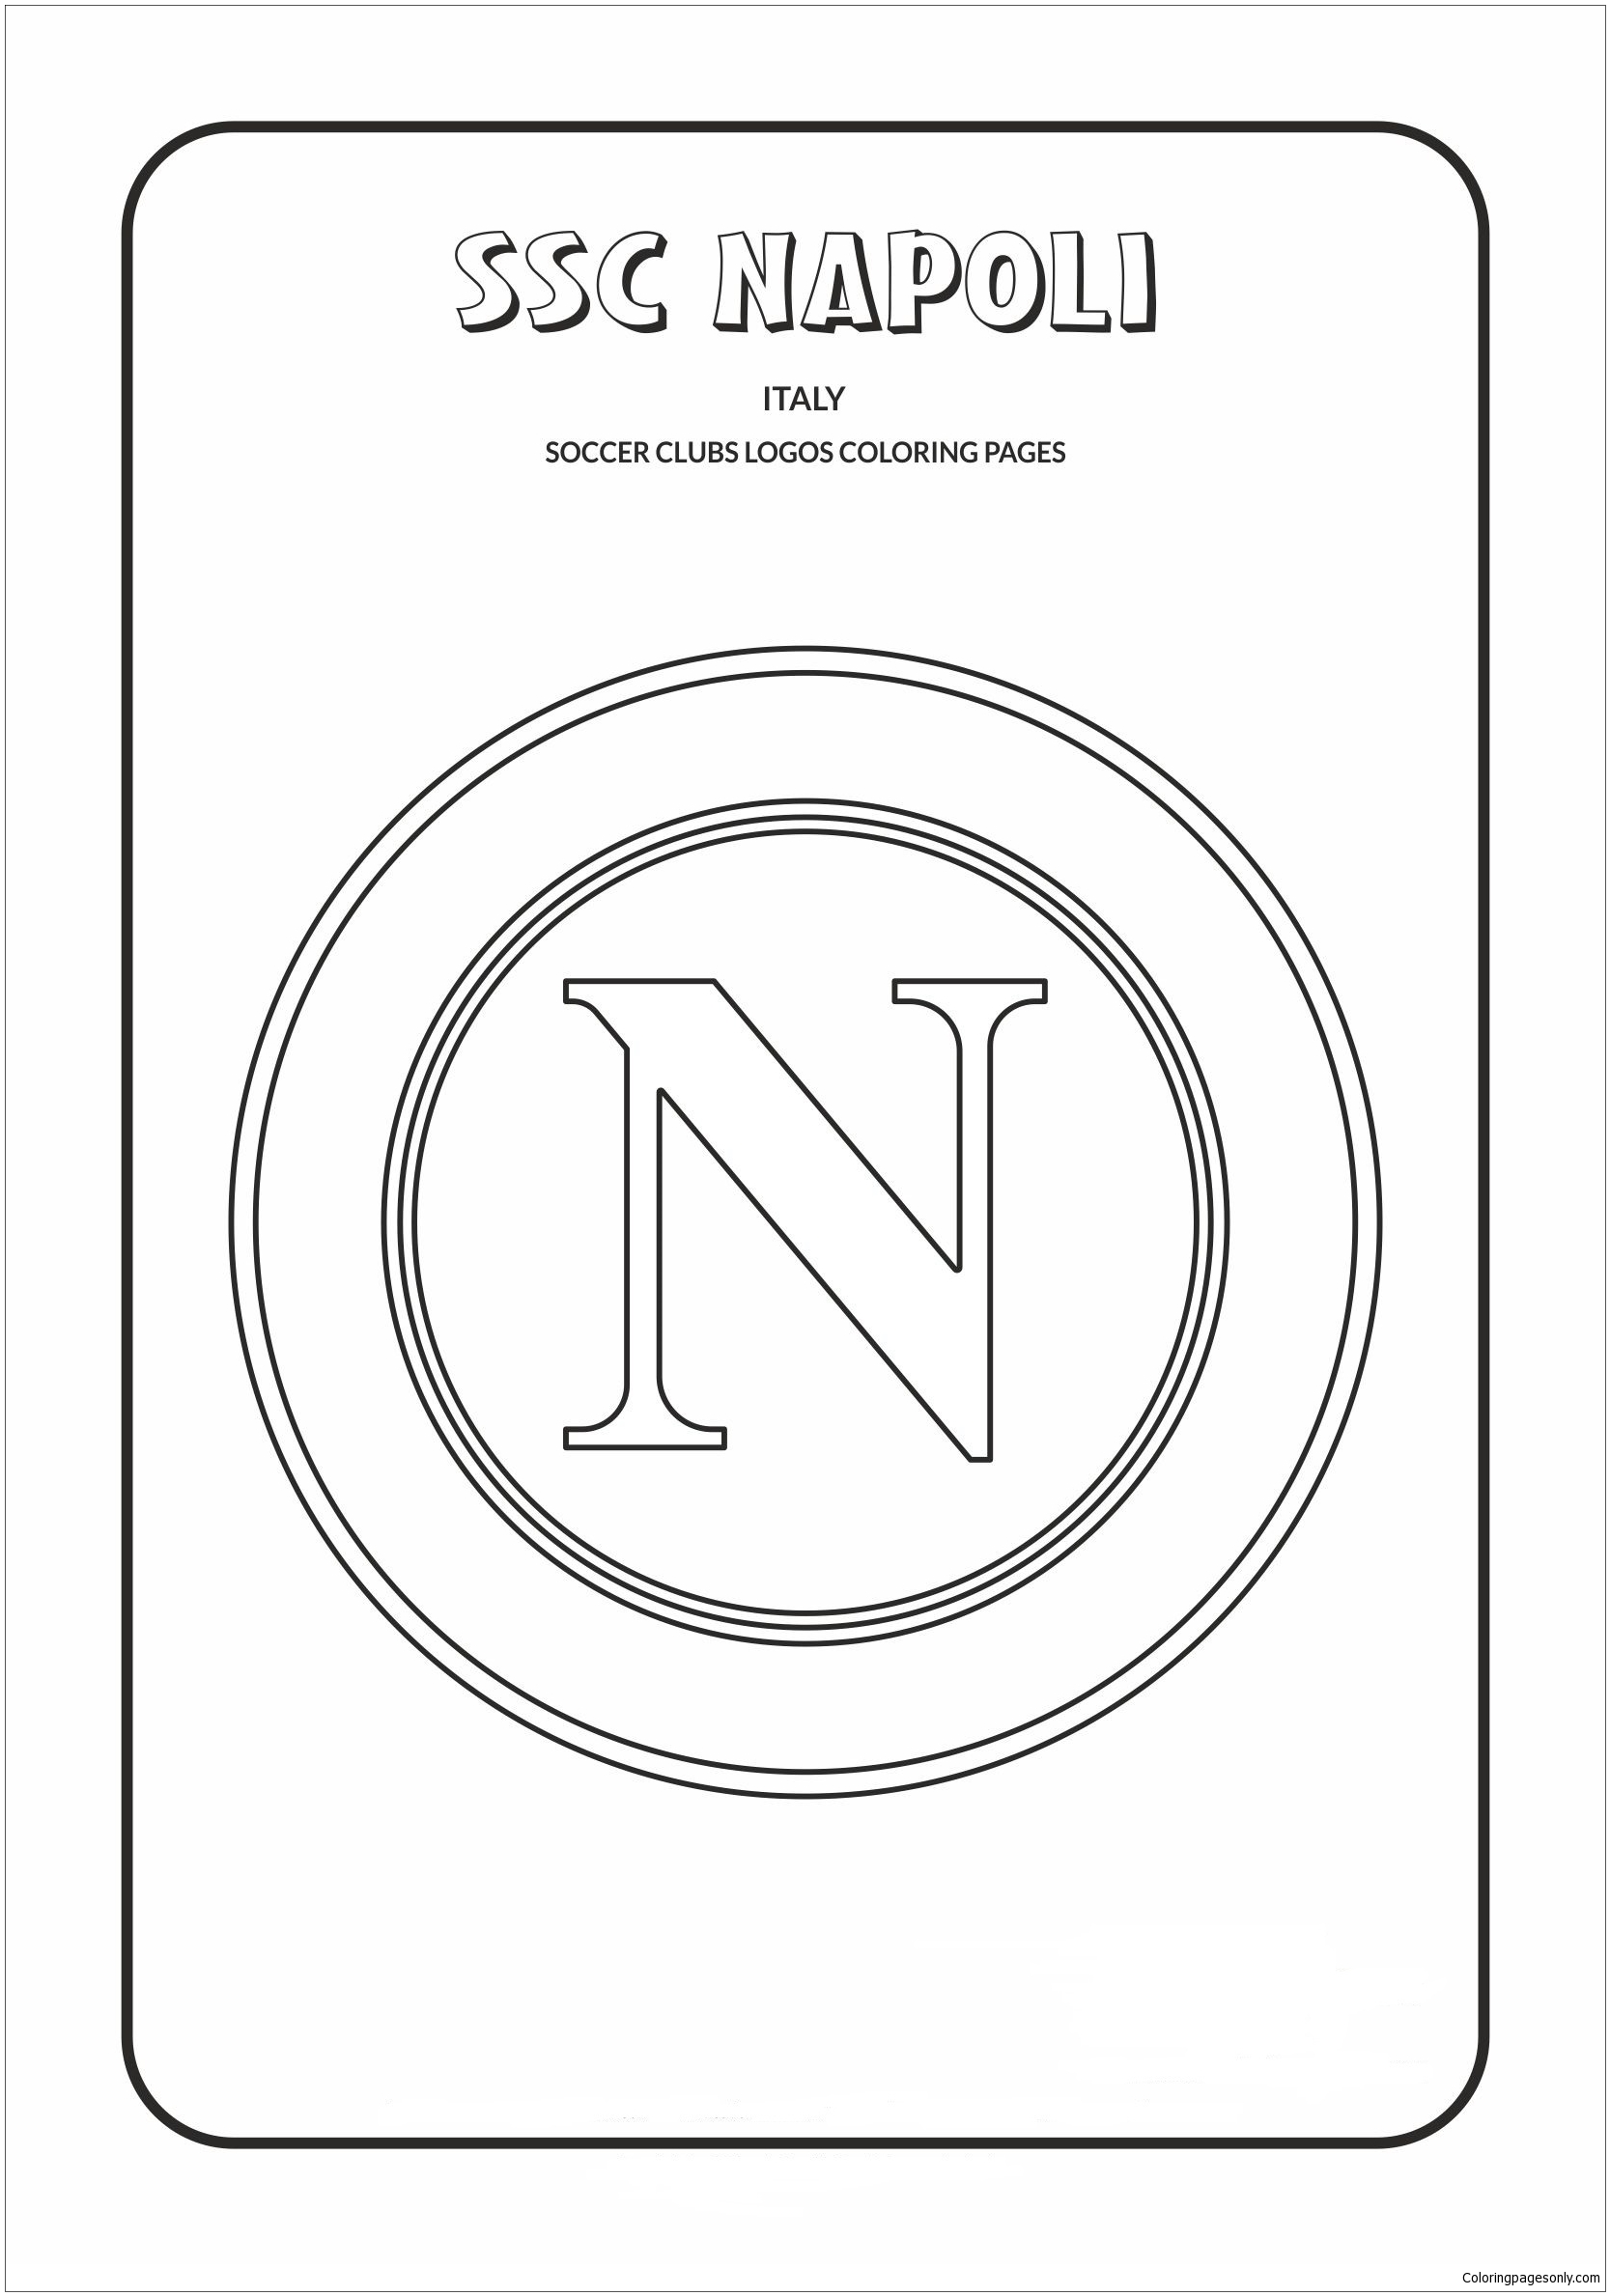 S.S.C. Napoli Coloring Pages